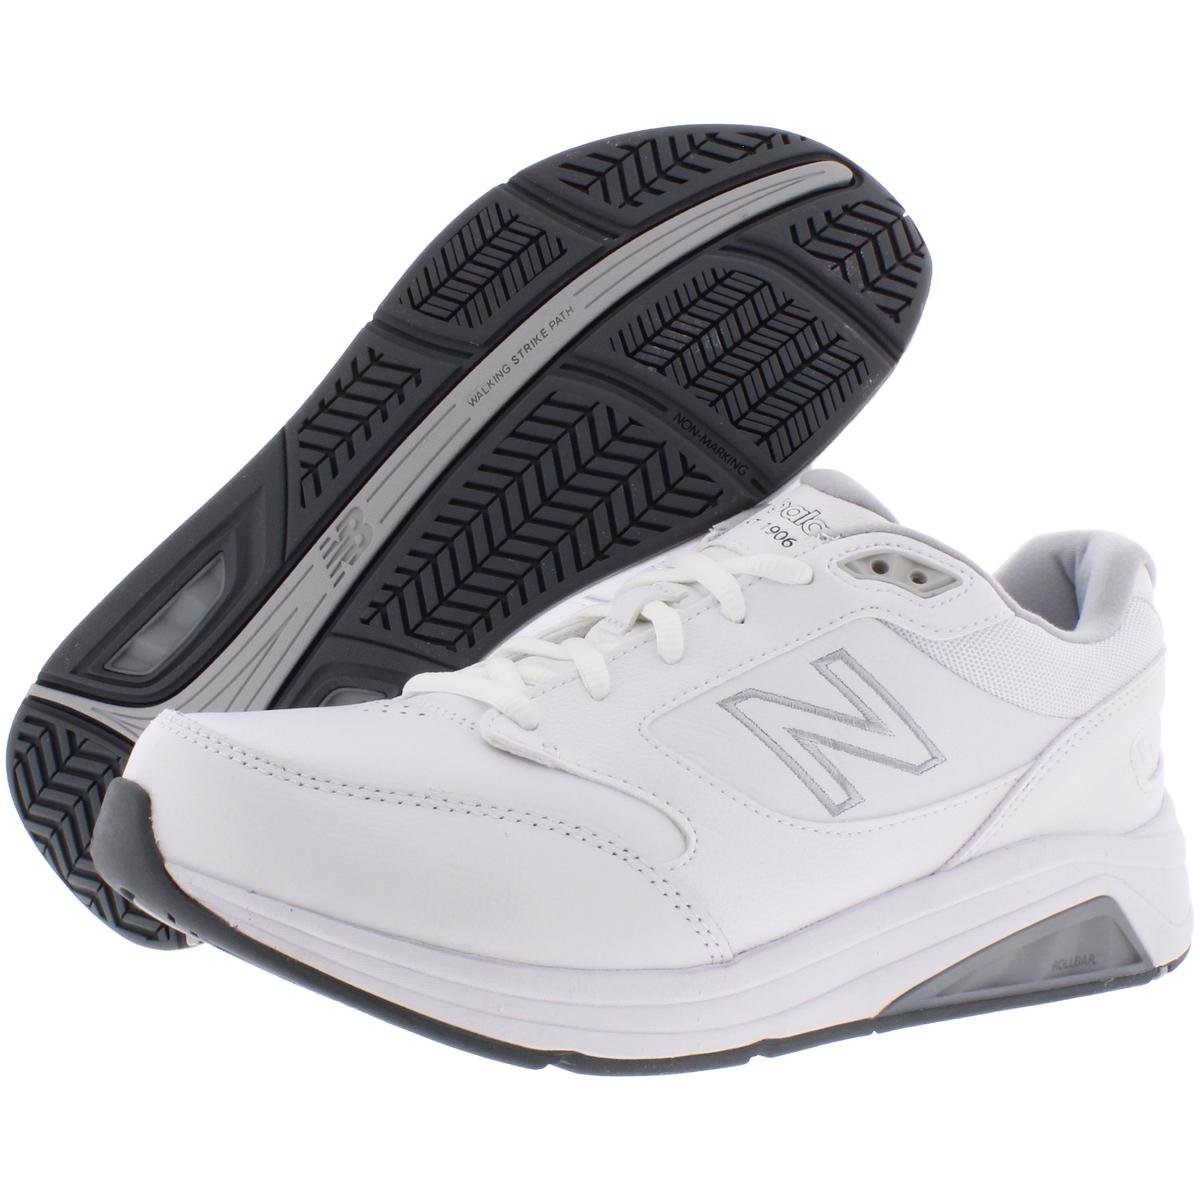 New Balance Mens 928 v3 White Walking Shoes Sneakers 11 XXWide (6E ...